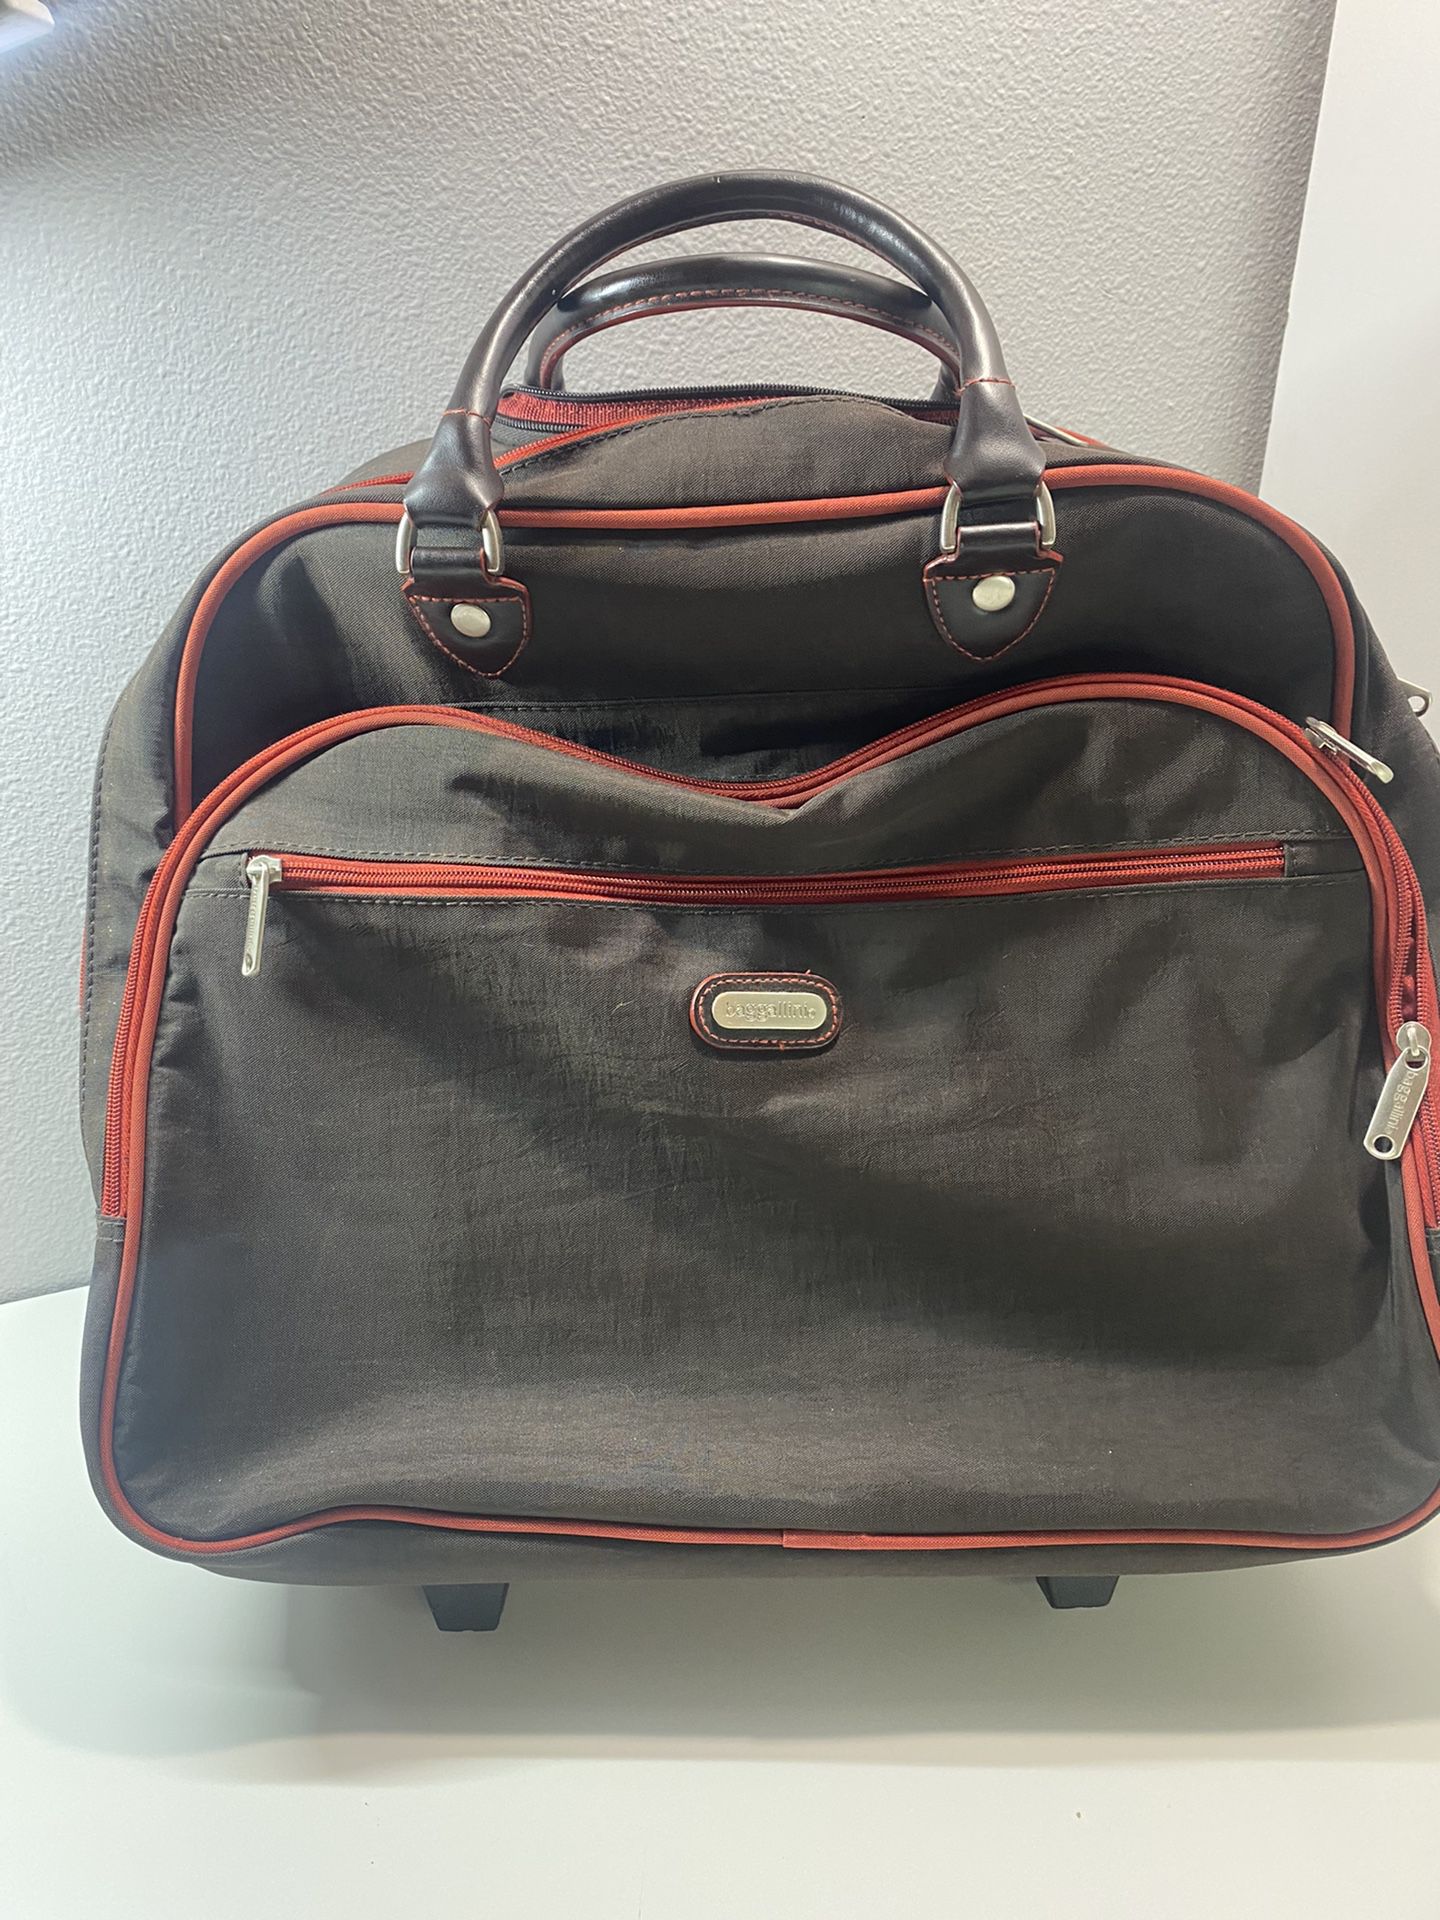 BAGGALINI CARRY ON/TRAVEL BAG/Brown Red Trim